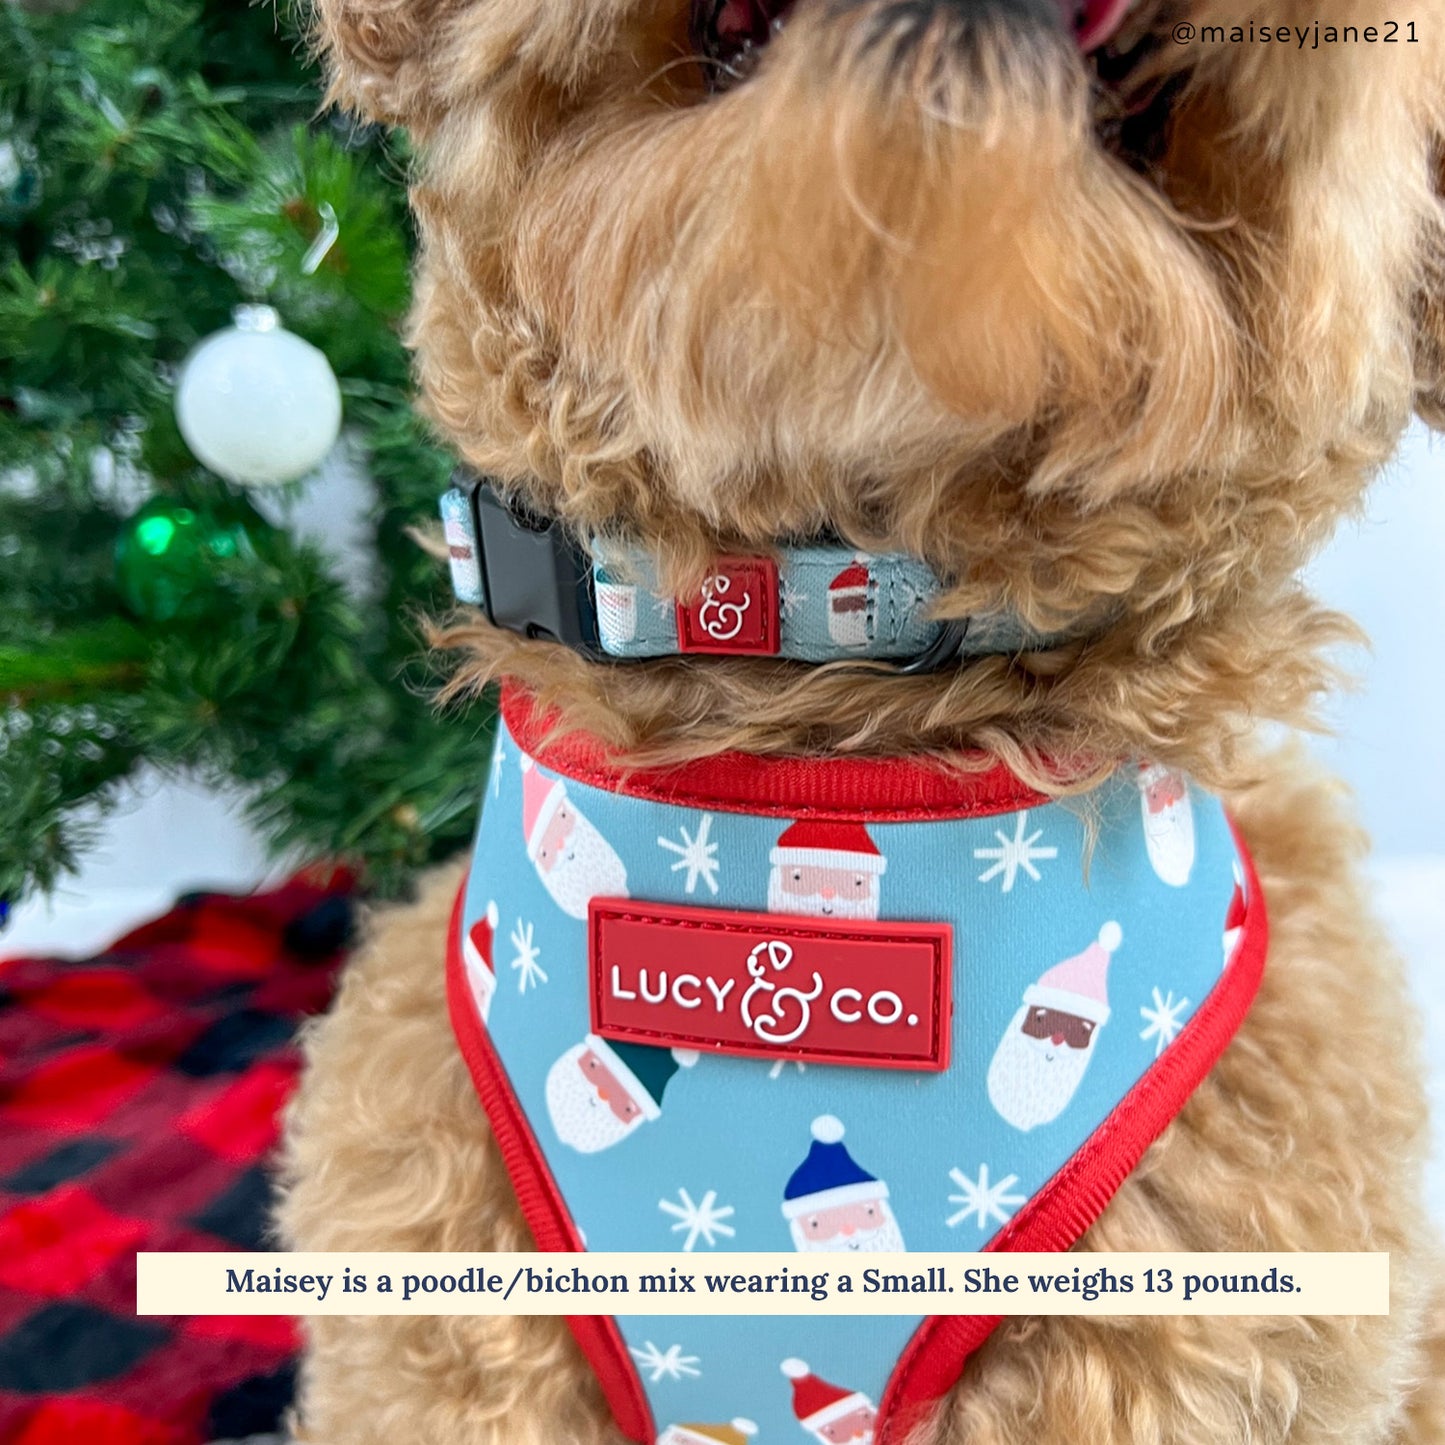 Limited Edition! The Merry & Bright Collar